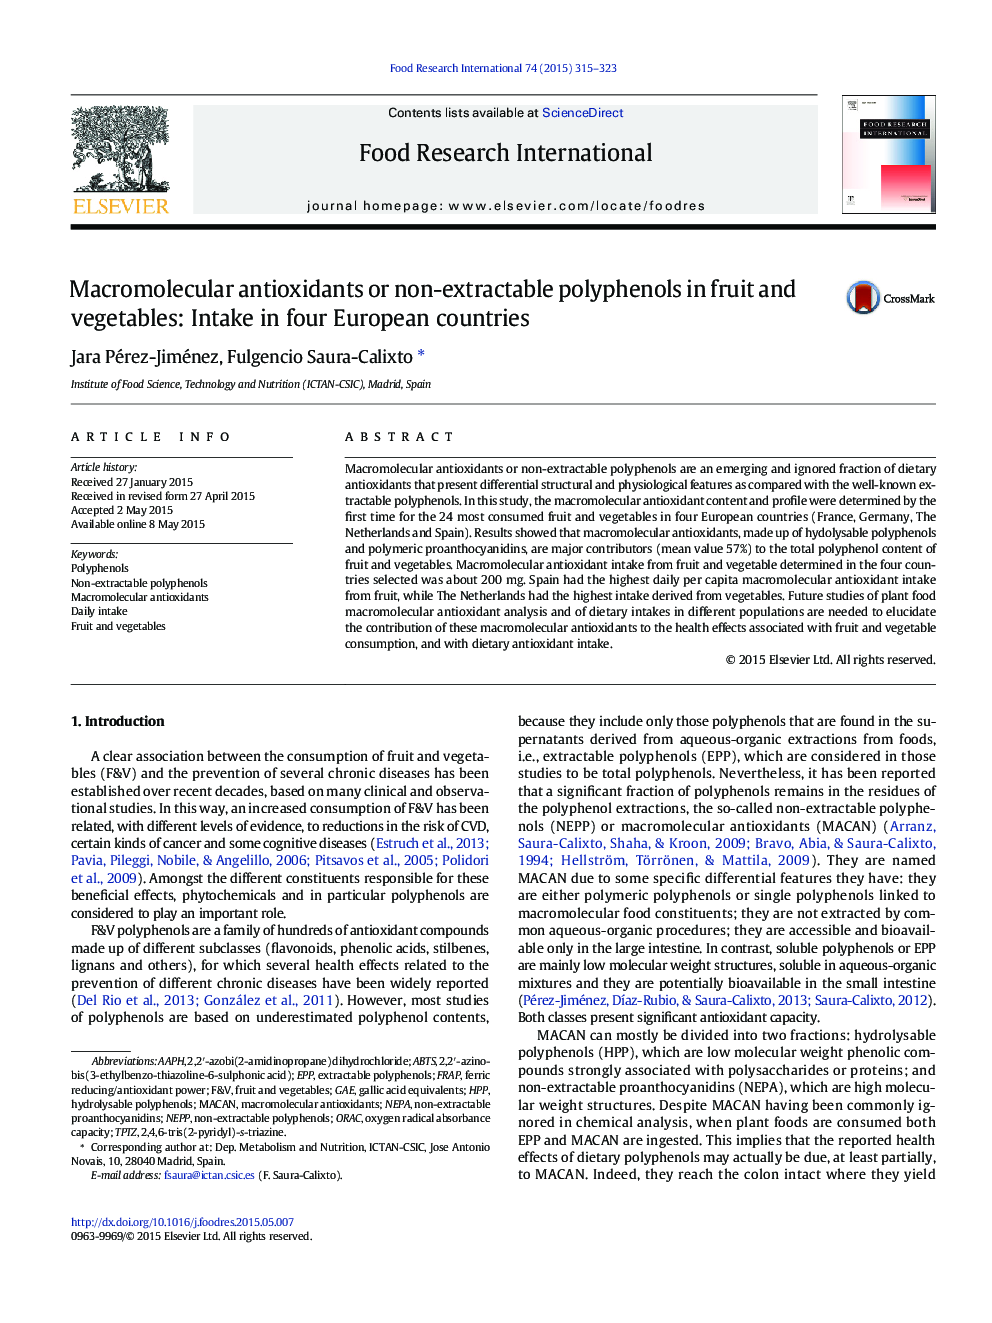 Macromolecular antioxidants or non-extractable polyphenols in fruit and vegetables: Intake in four European countries